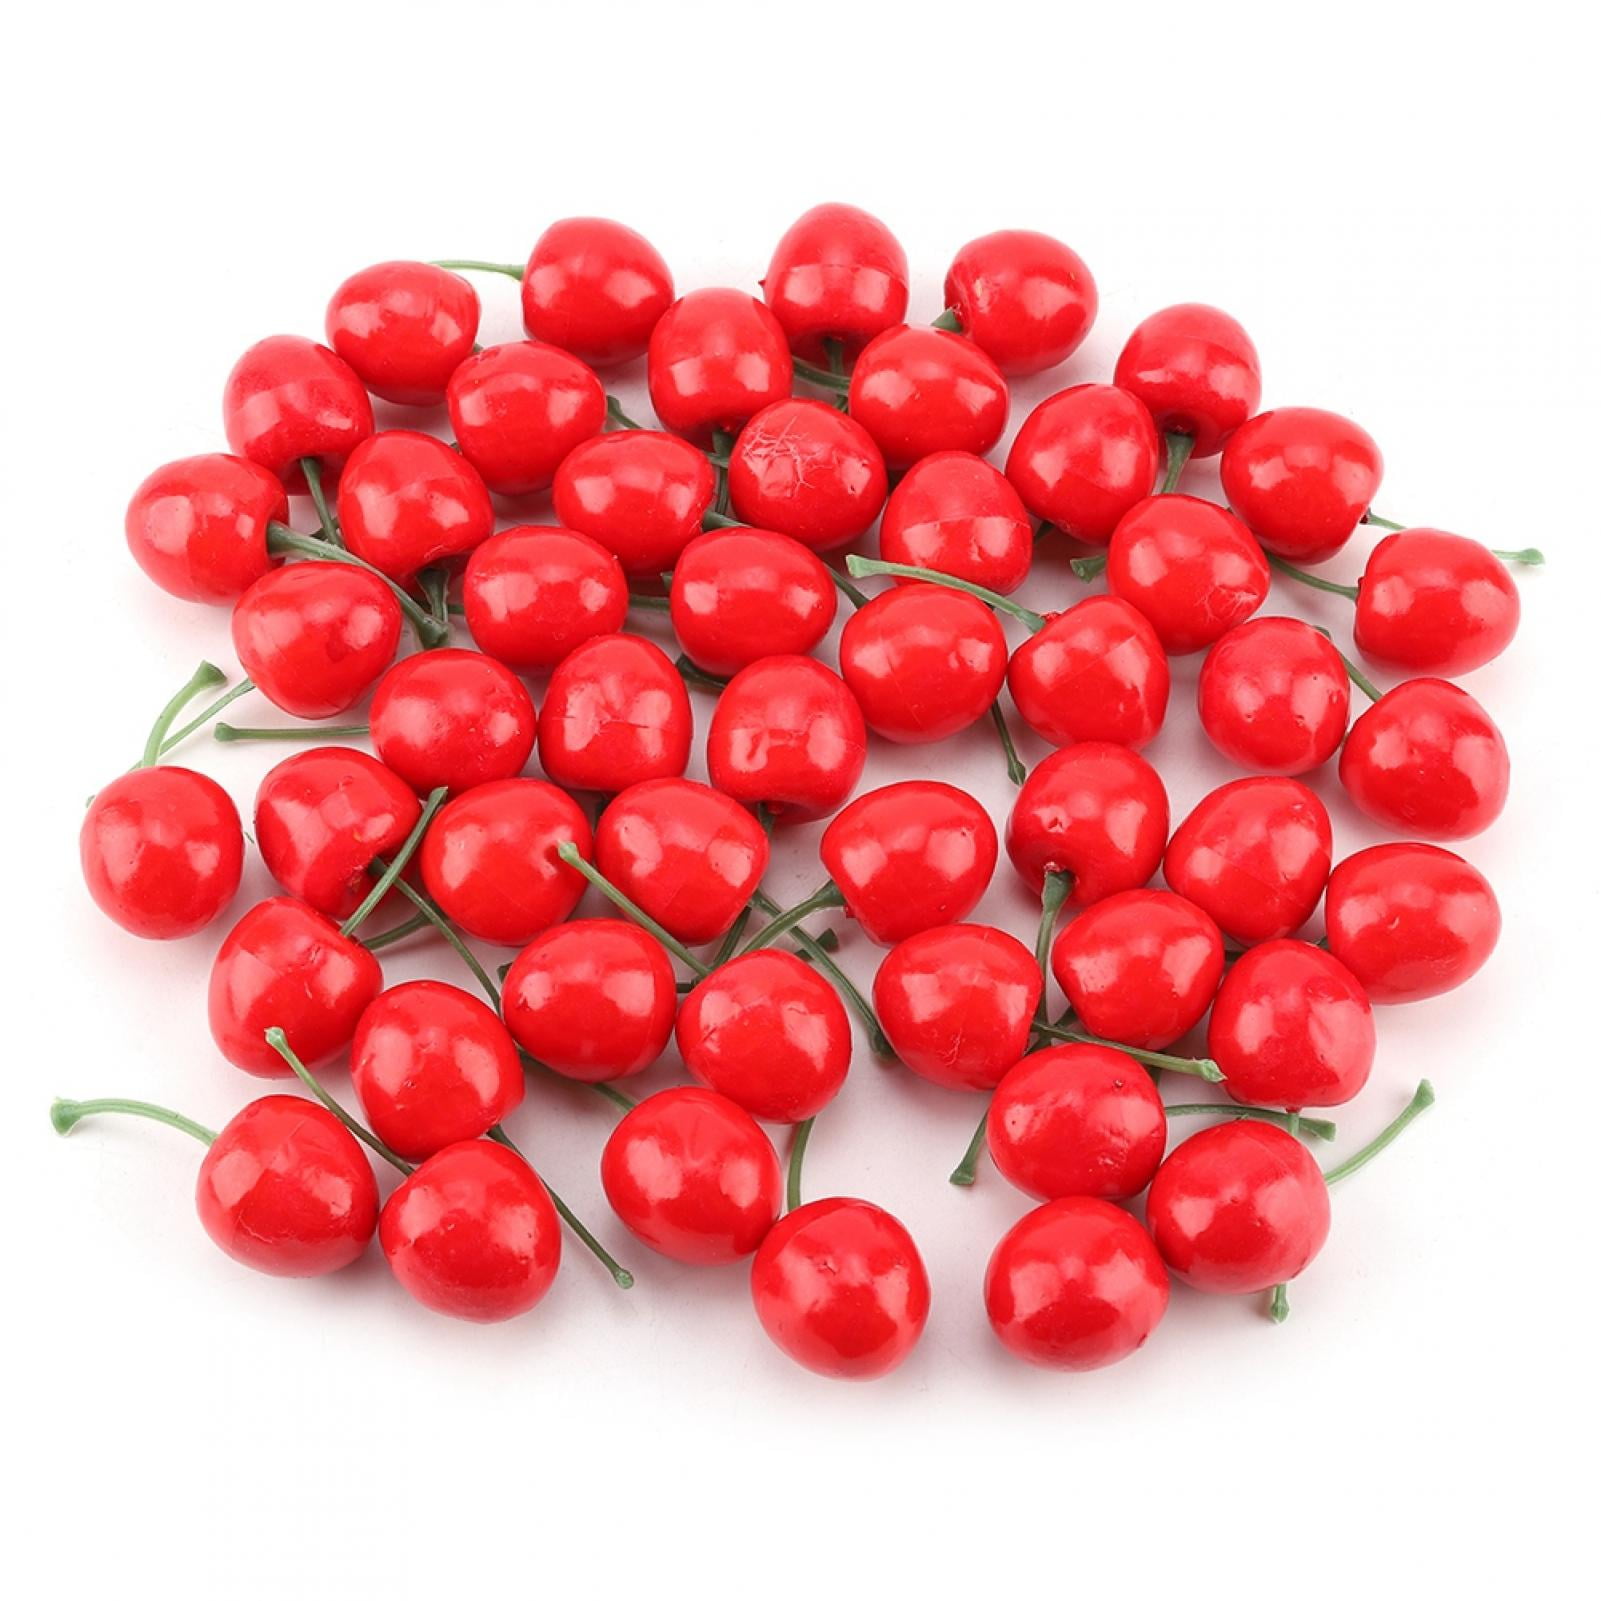 50XArtificial Fake Plastic Cherry Fruit Food Party Table Decorative foliage Bowl 